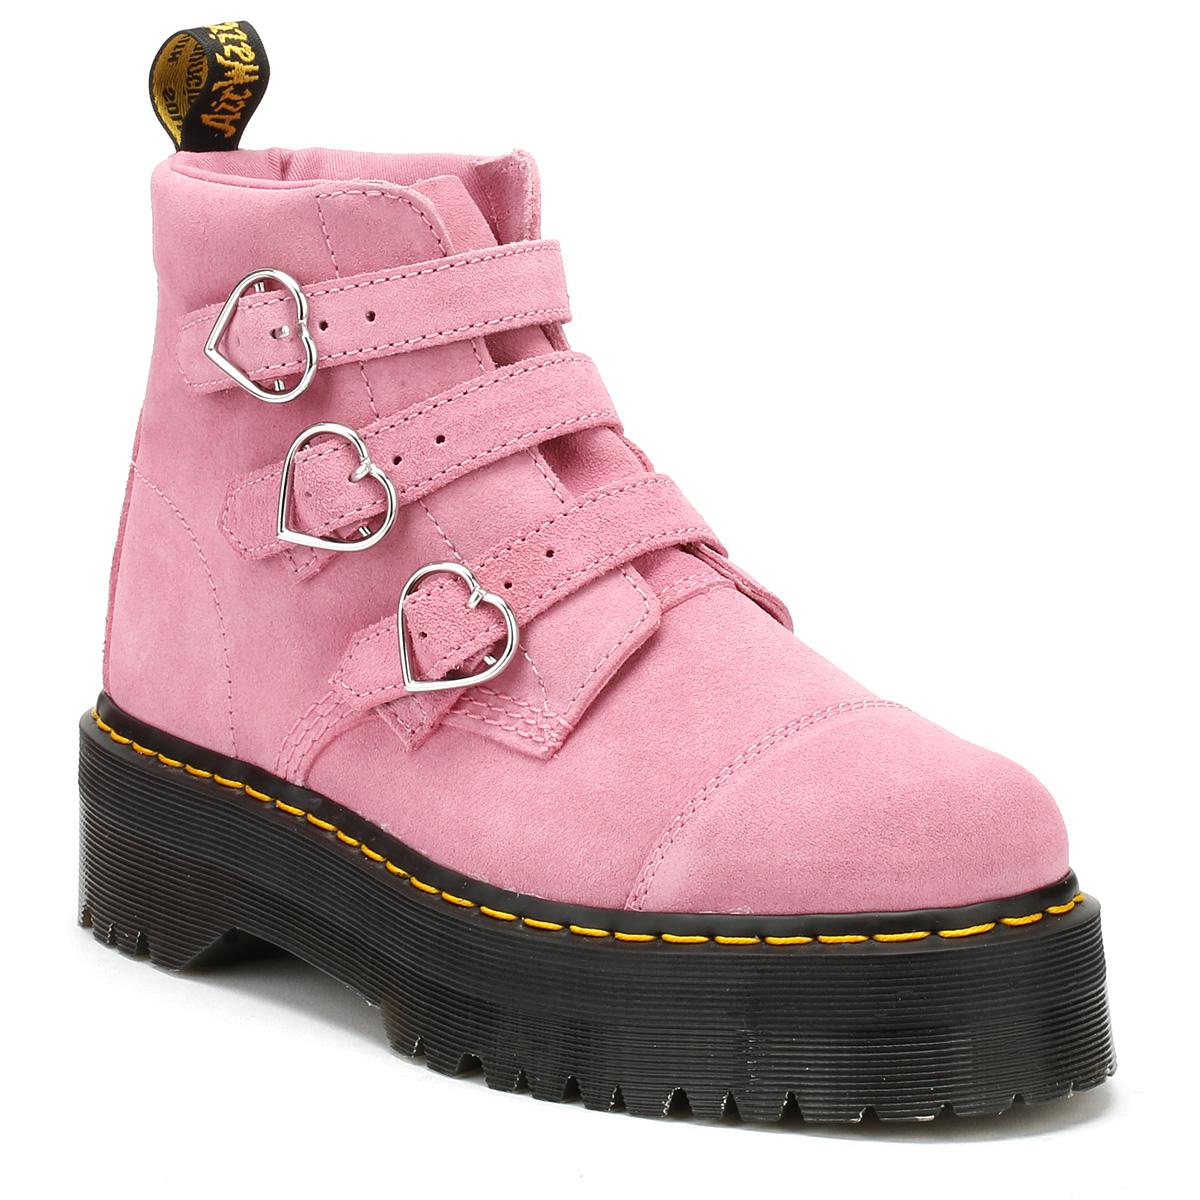 Dr. Martens Suede Dr. Martens Womens Lazy Oaf Pink Buckle Boots - Lyst